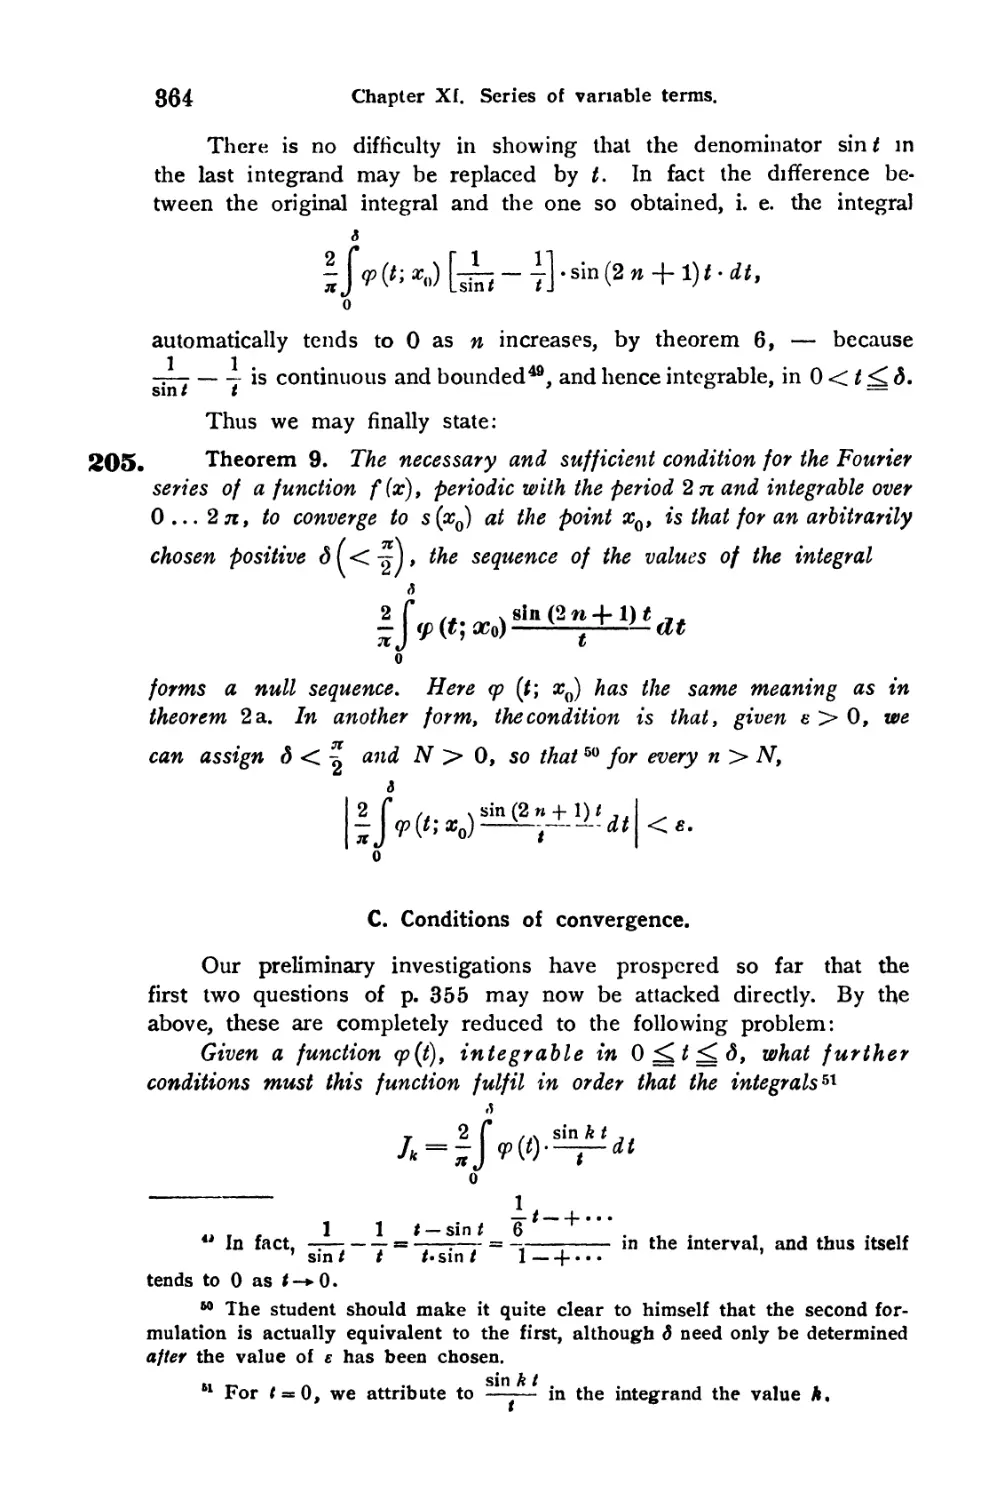 C. Conditions of convergence